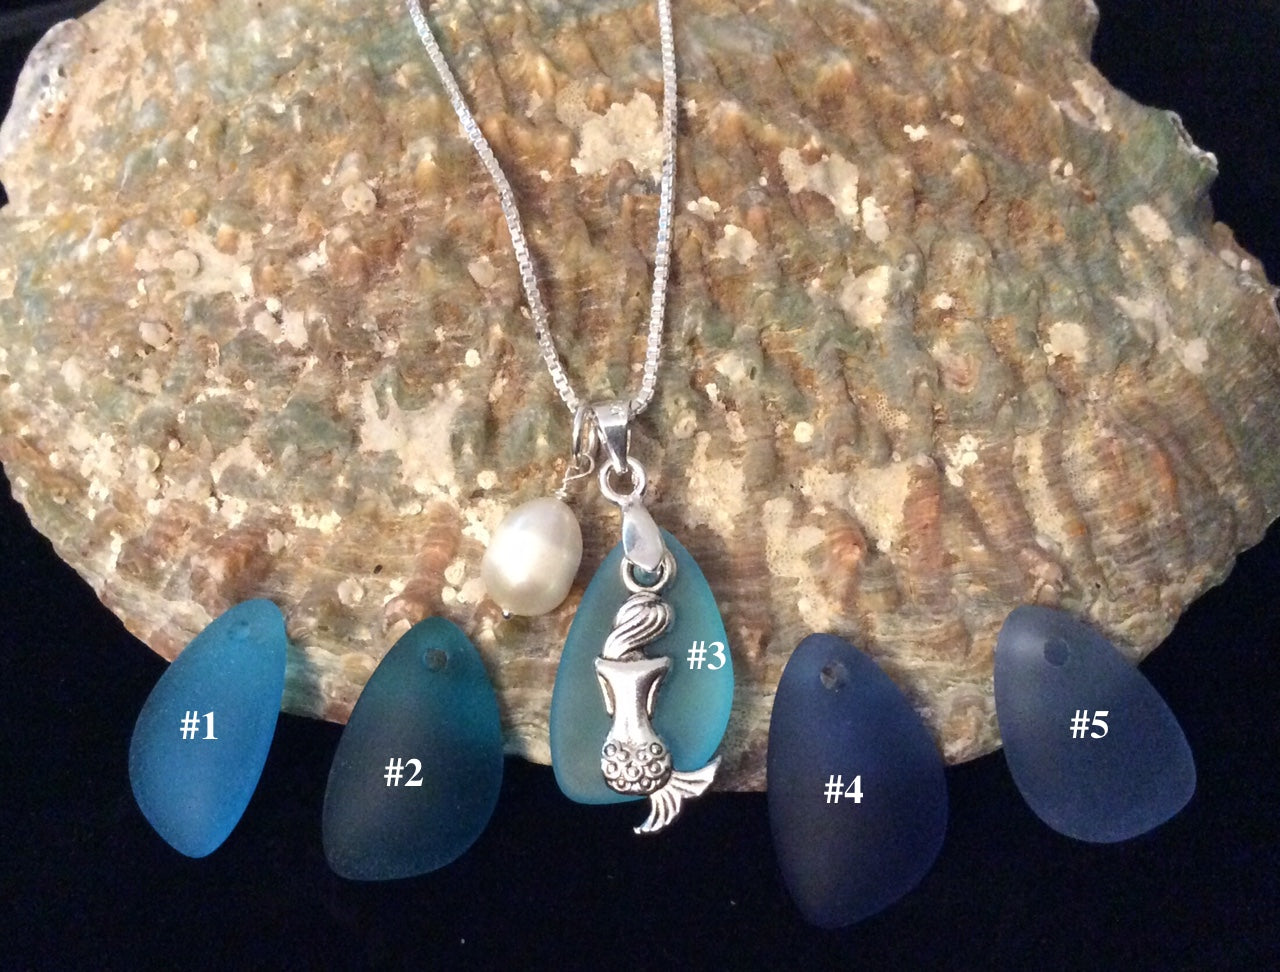 Mid Blue sea glass necklace pendant on sterling silver chain.